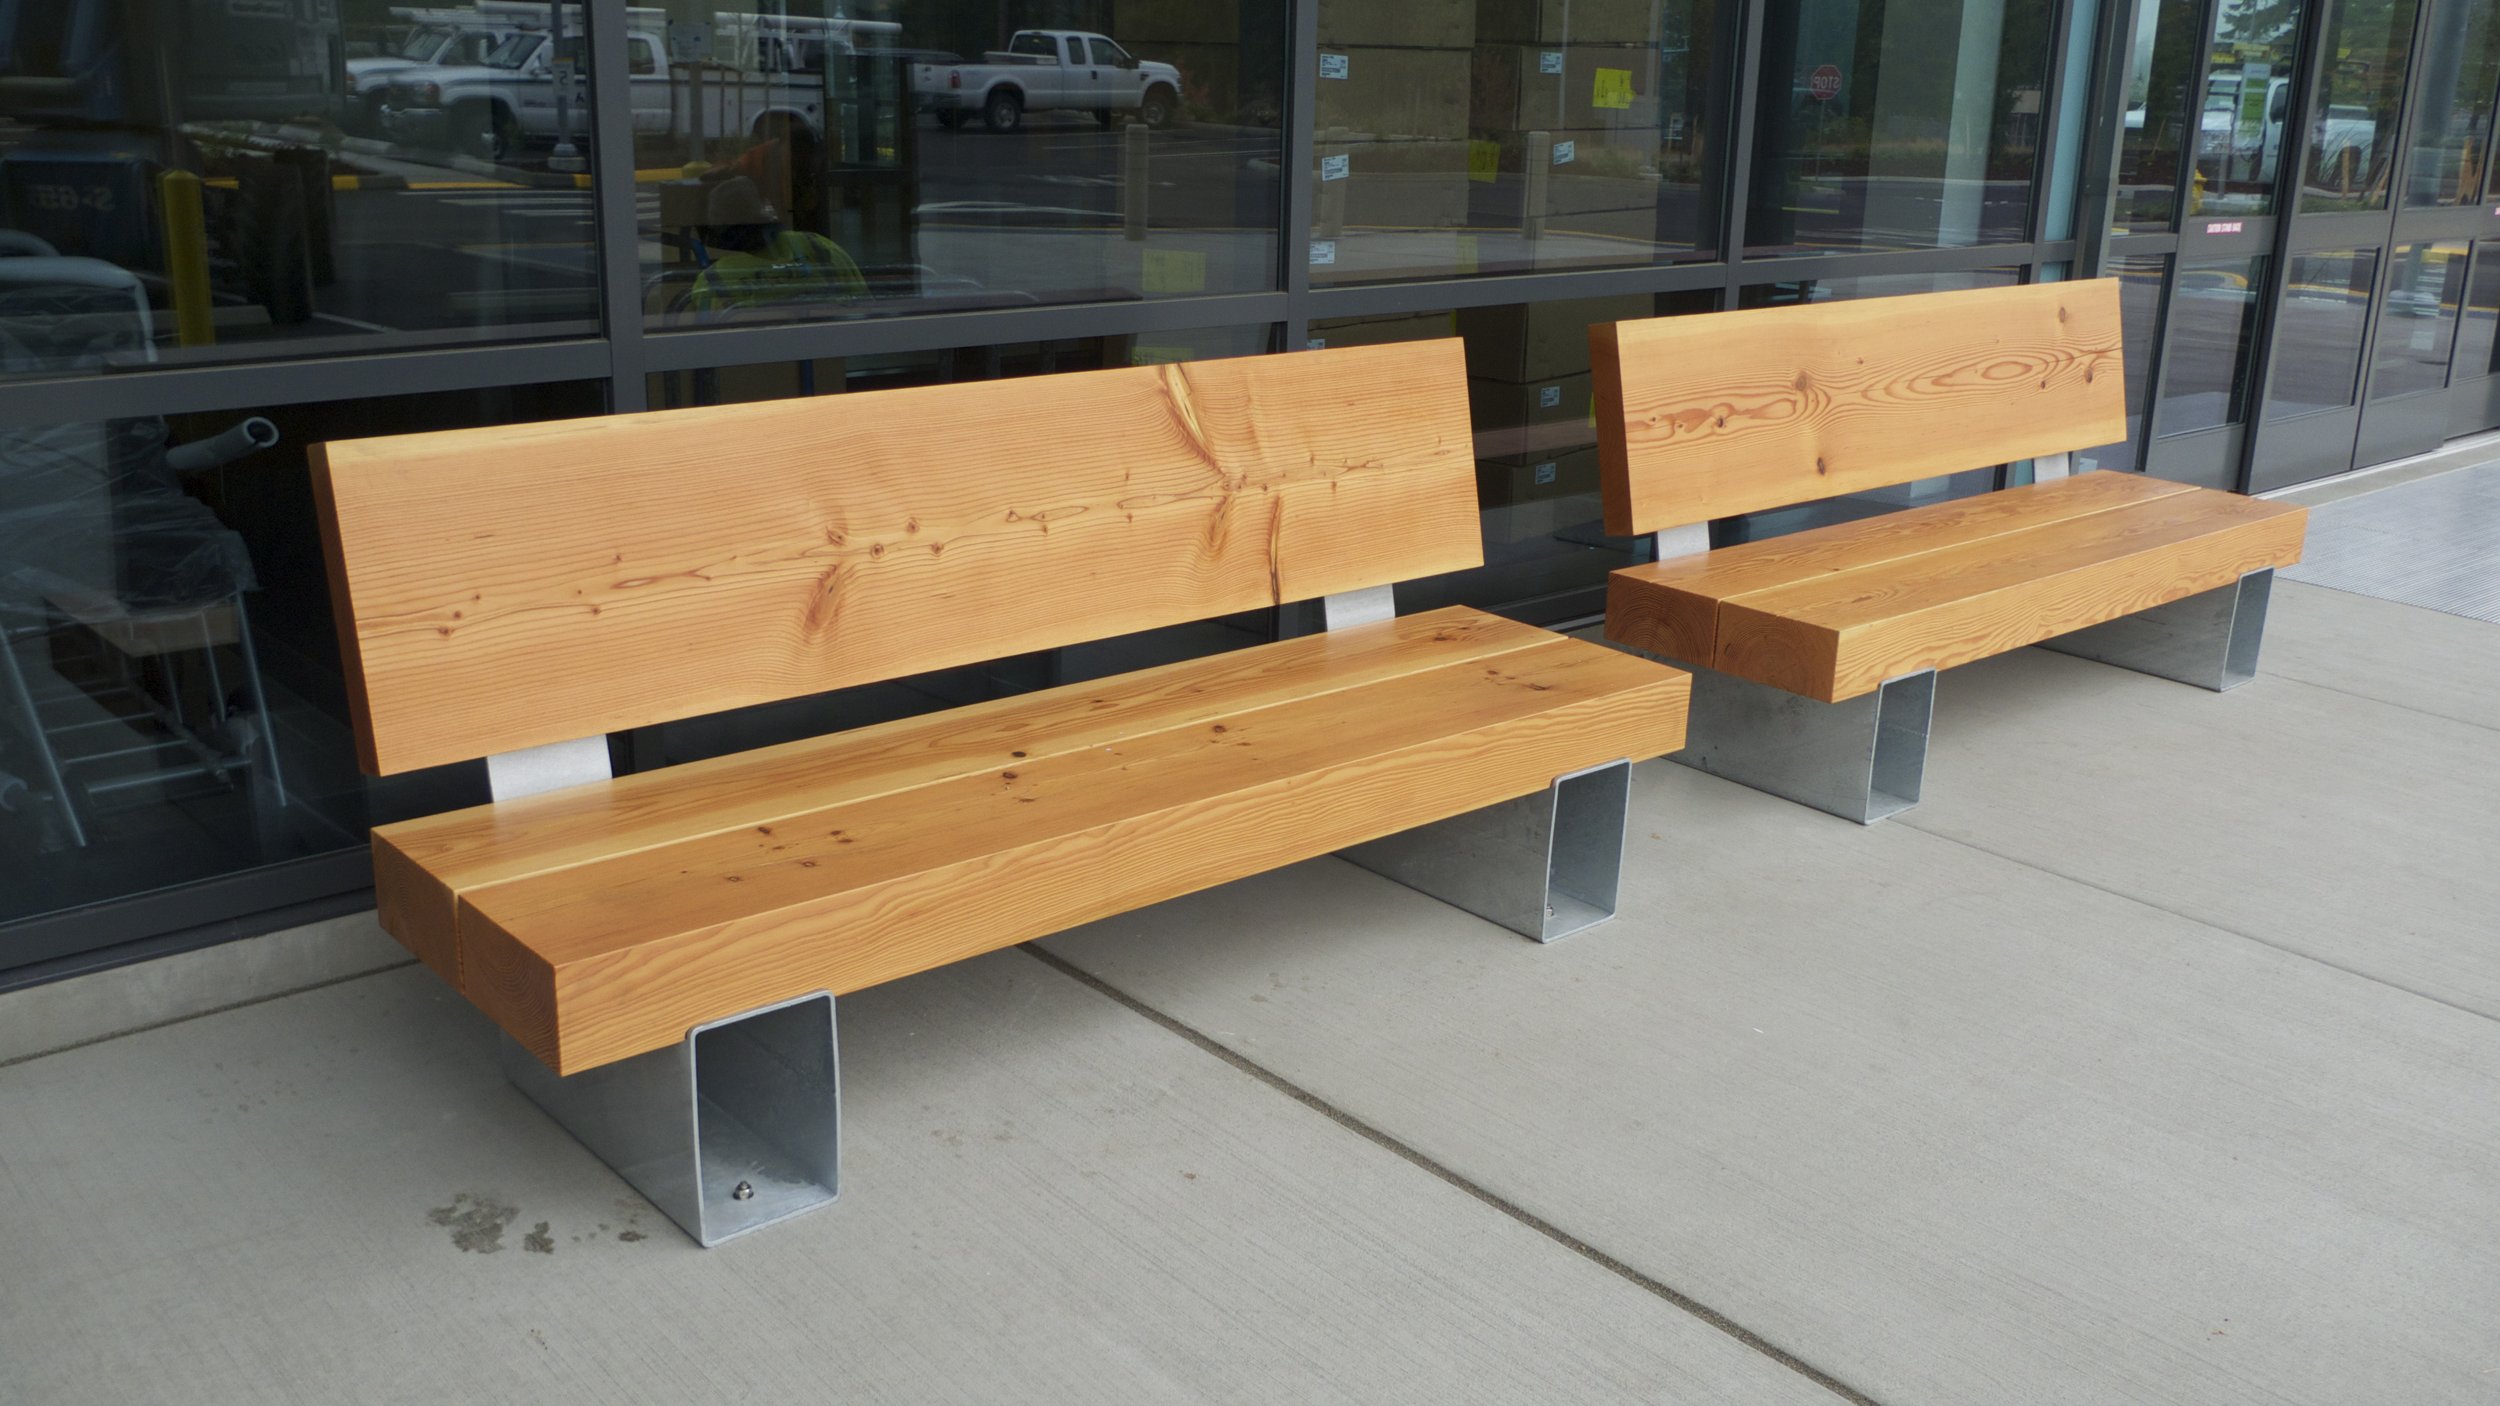 Outdoor Muir benches made from site-sourced fir